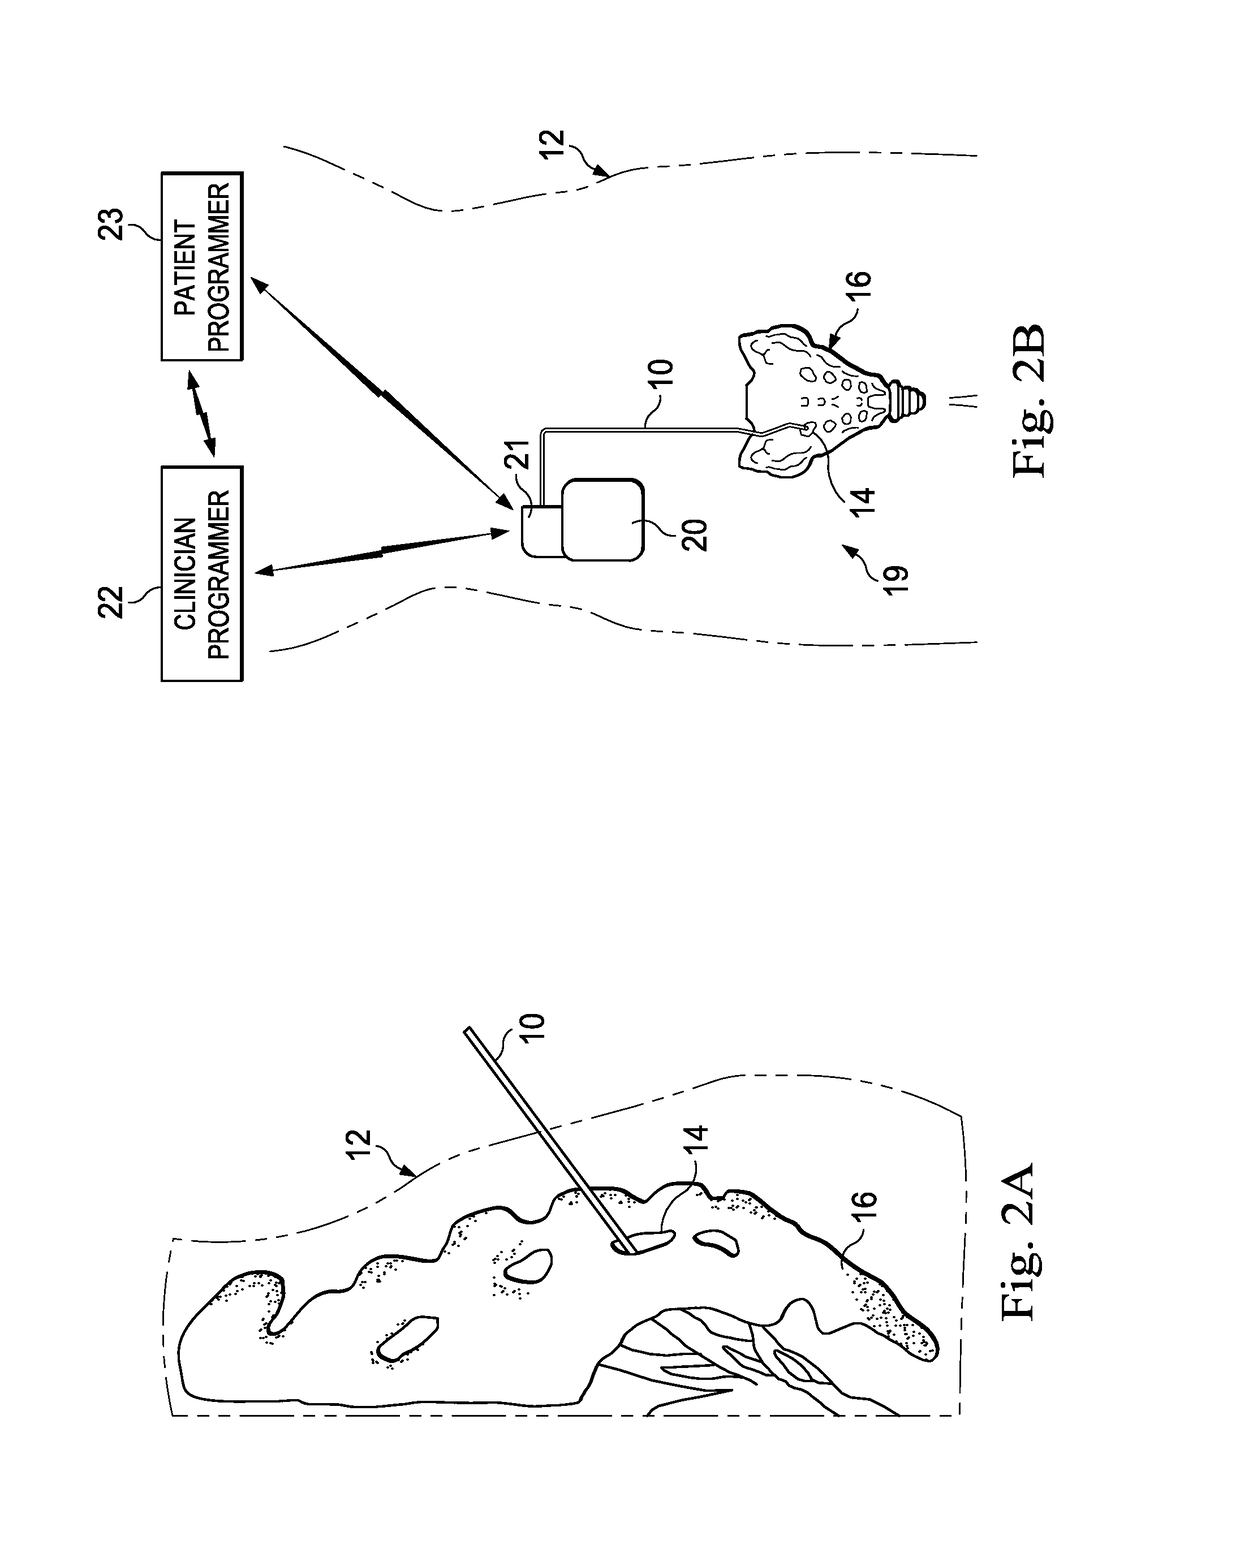 Systems, methods, and devices for performing electronically controlled test stimulation